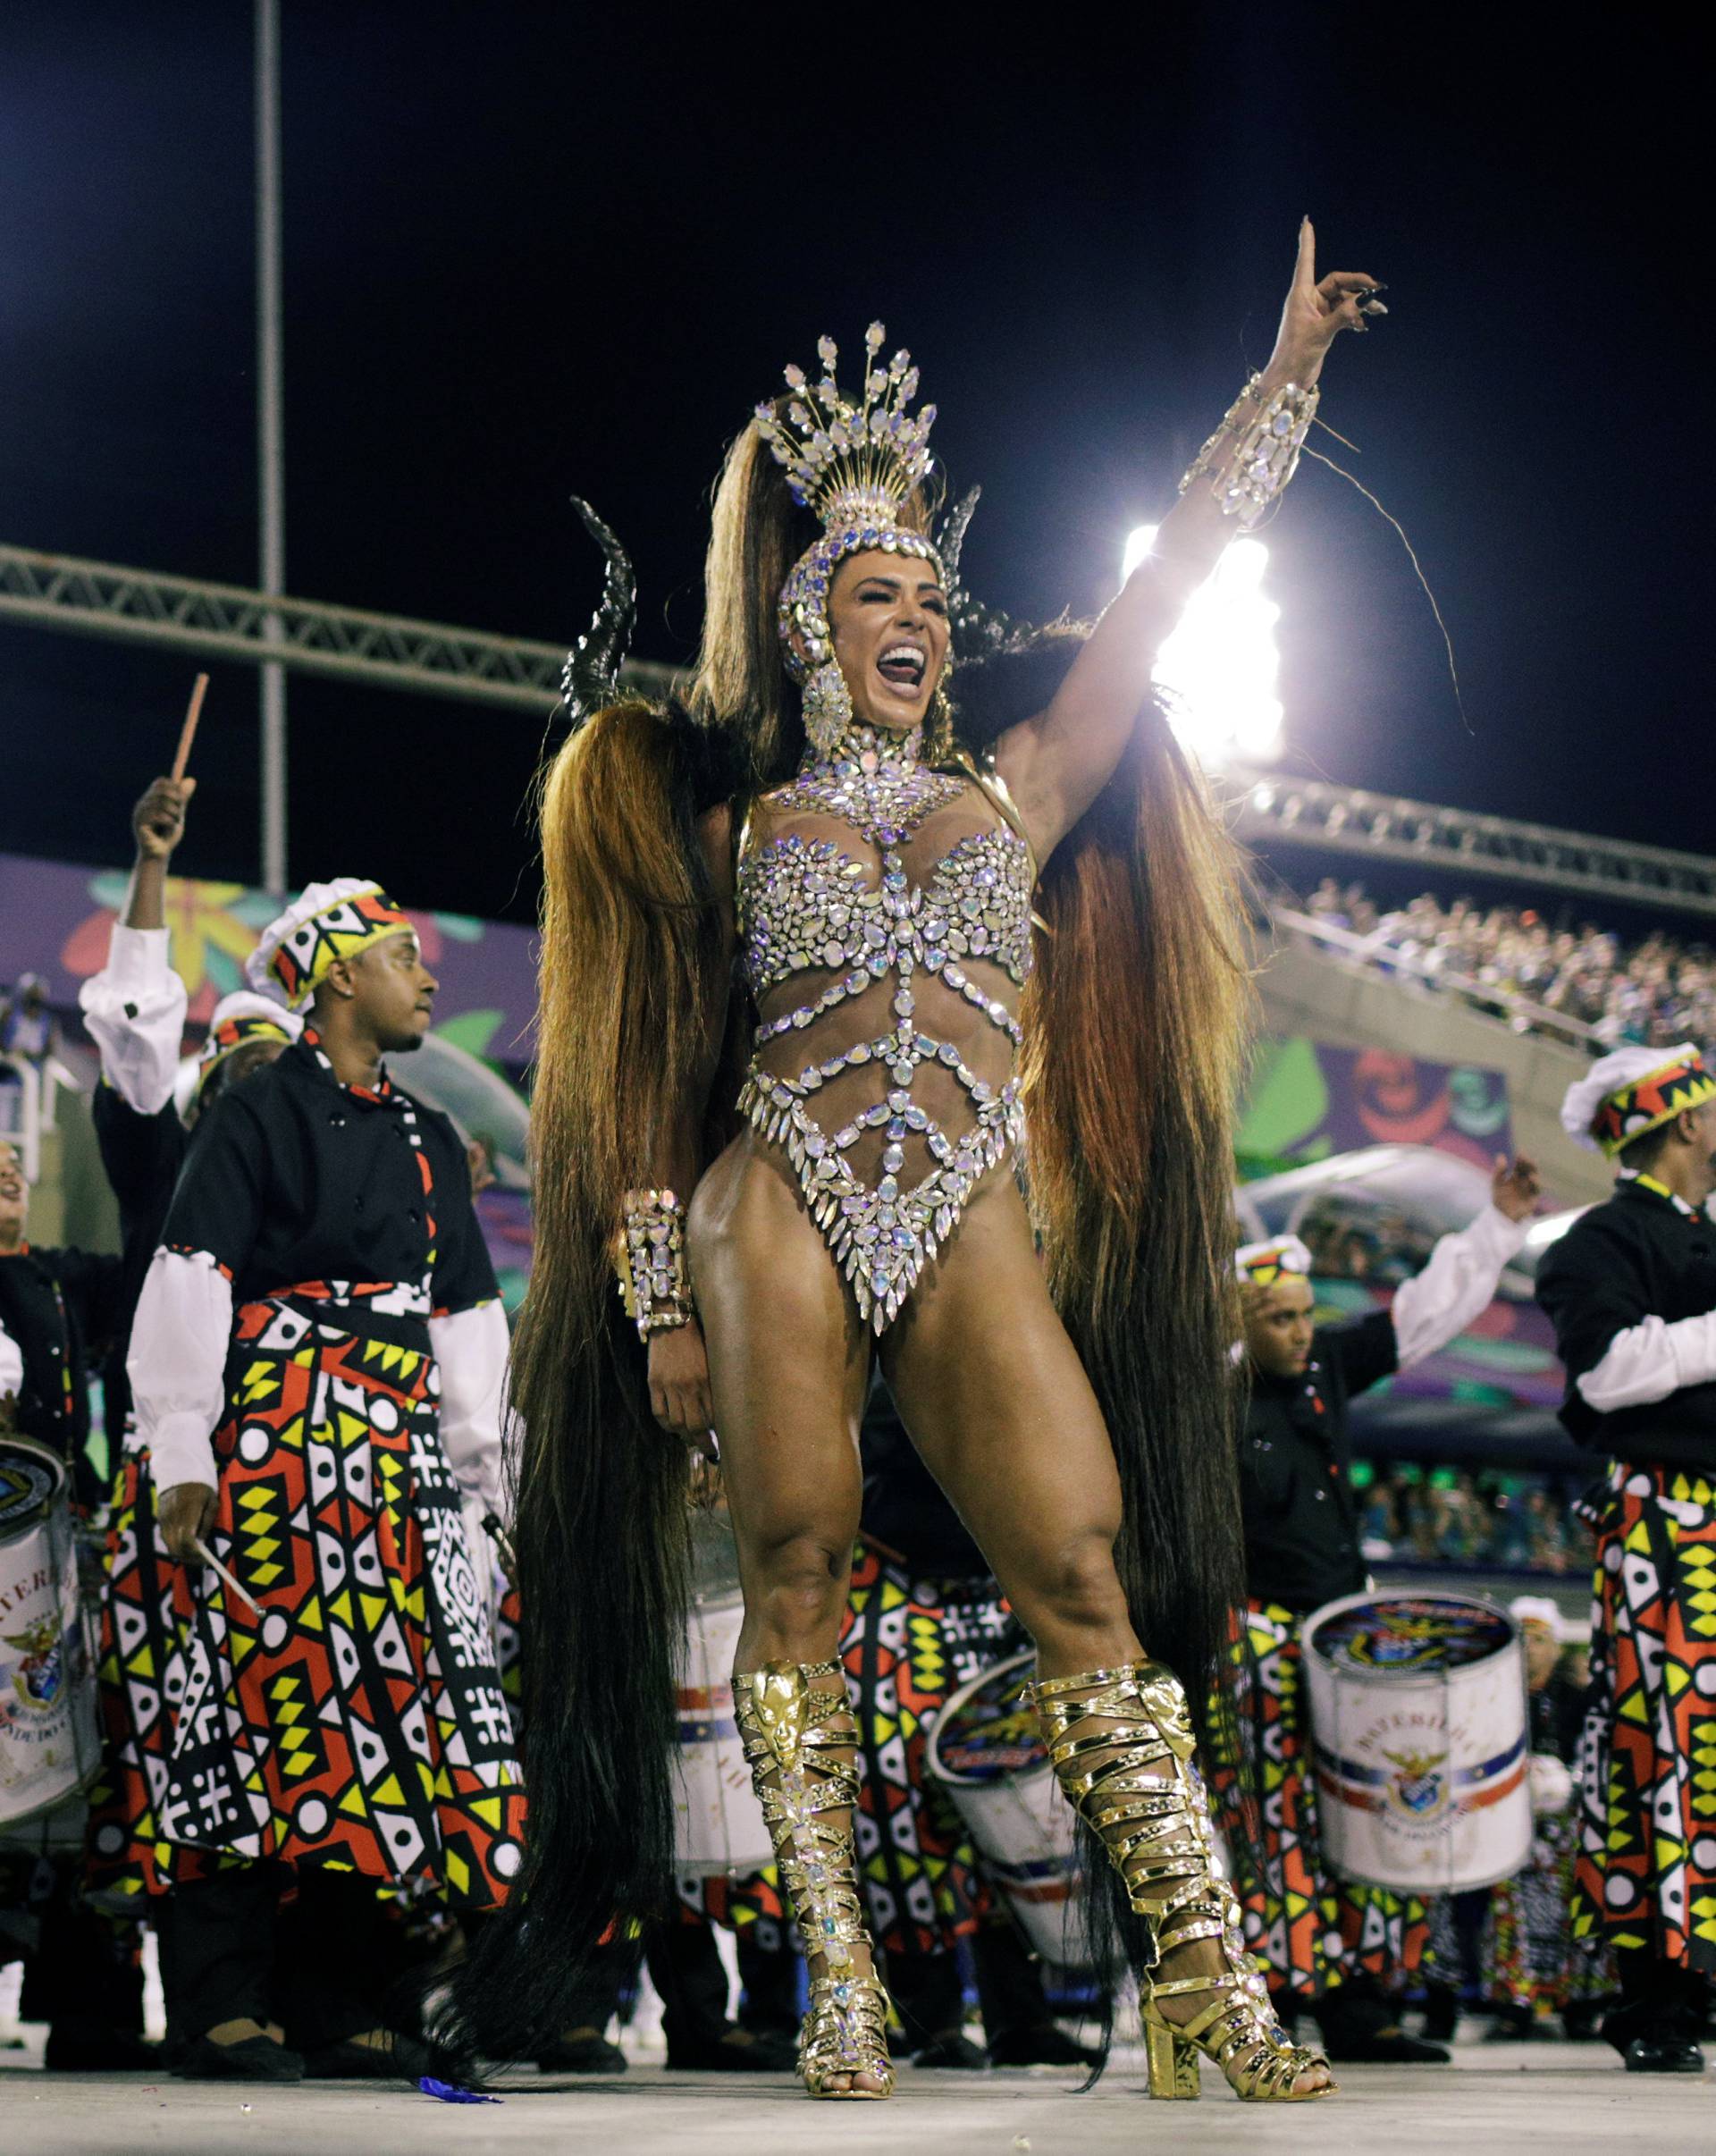 Drum queen Gracyanne Barbosa from Uniao da Ilha Samba school performs during the second night of the Carnival parade at the Sambadrome in Rio de Janeiro